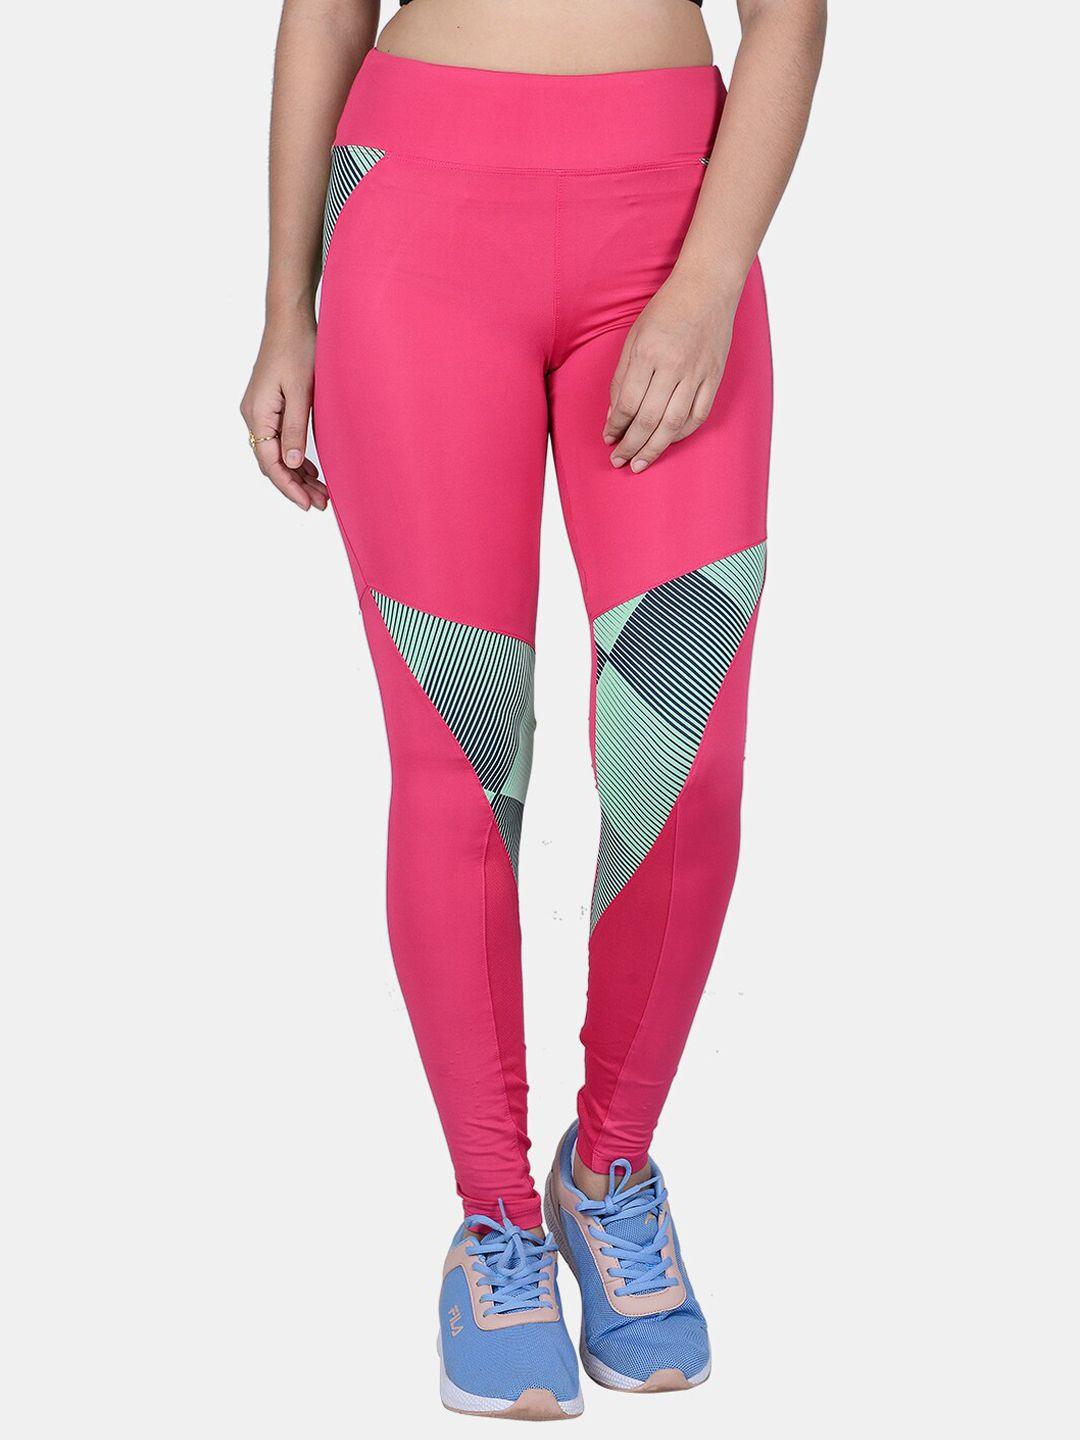 fila-women-pink-solid-ankle-length-tights